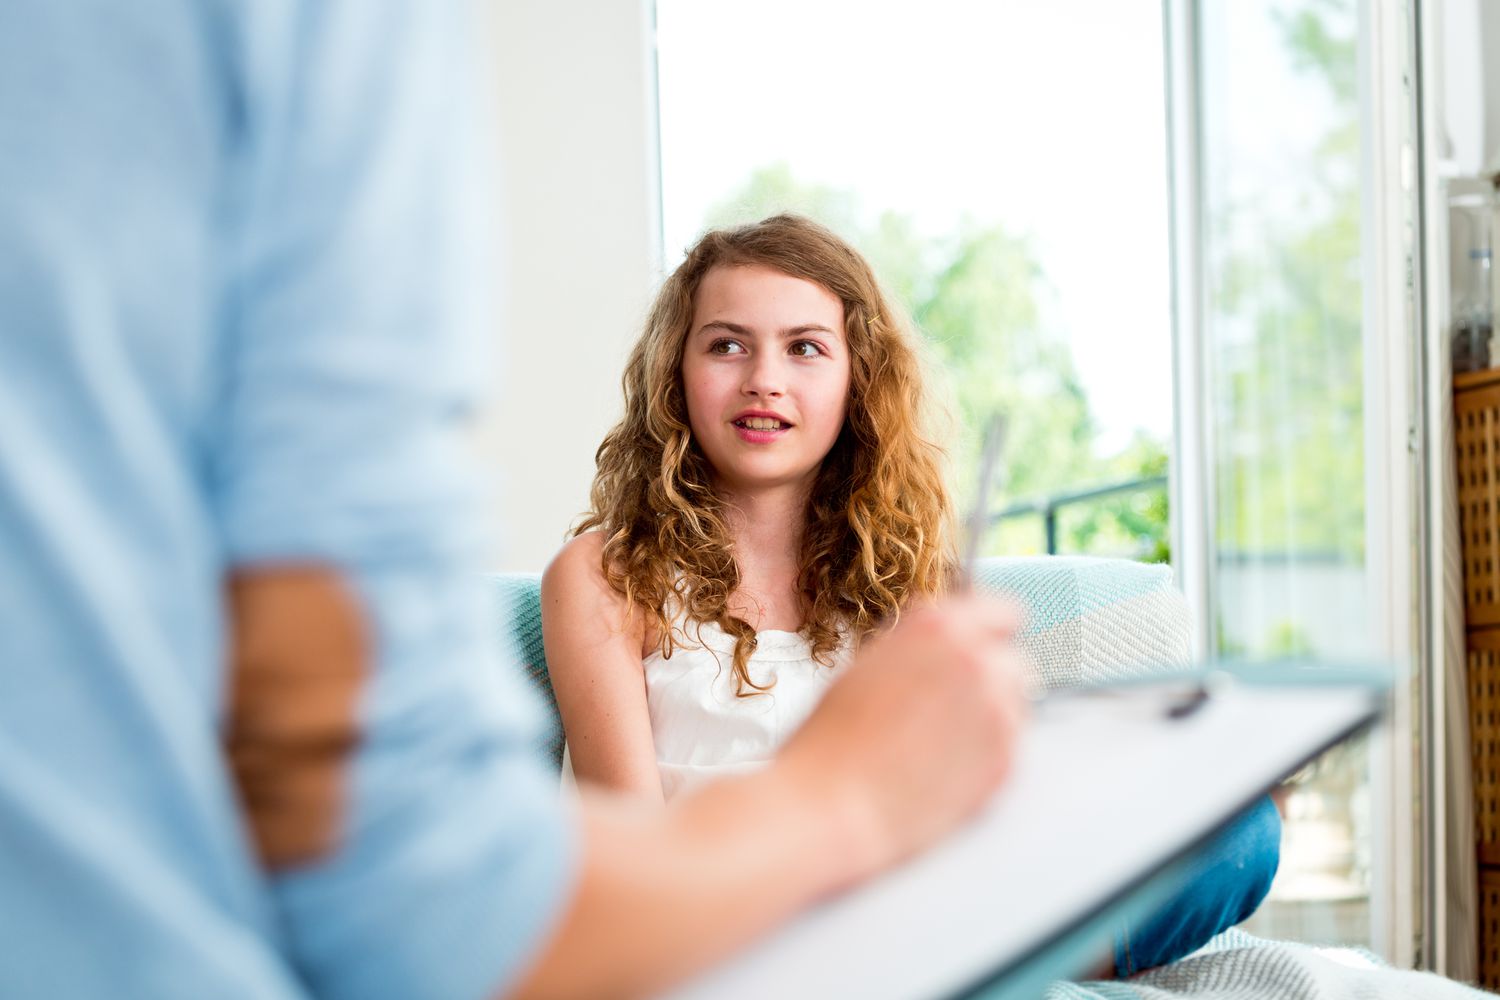 Therapists rule out various mental health issues when they meet with teens.